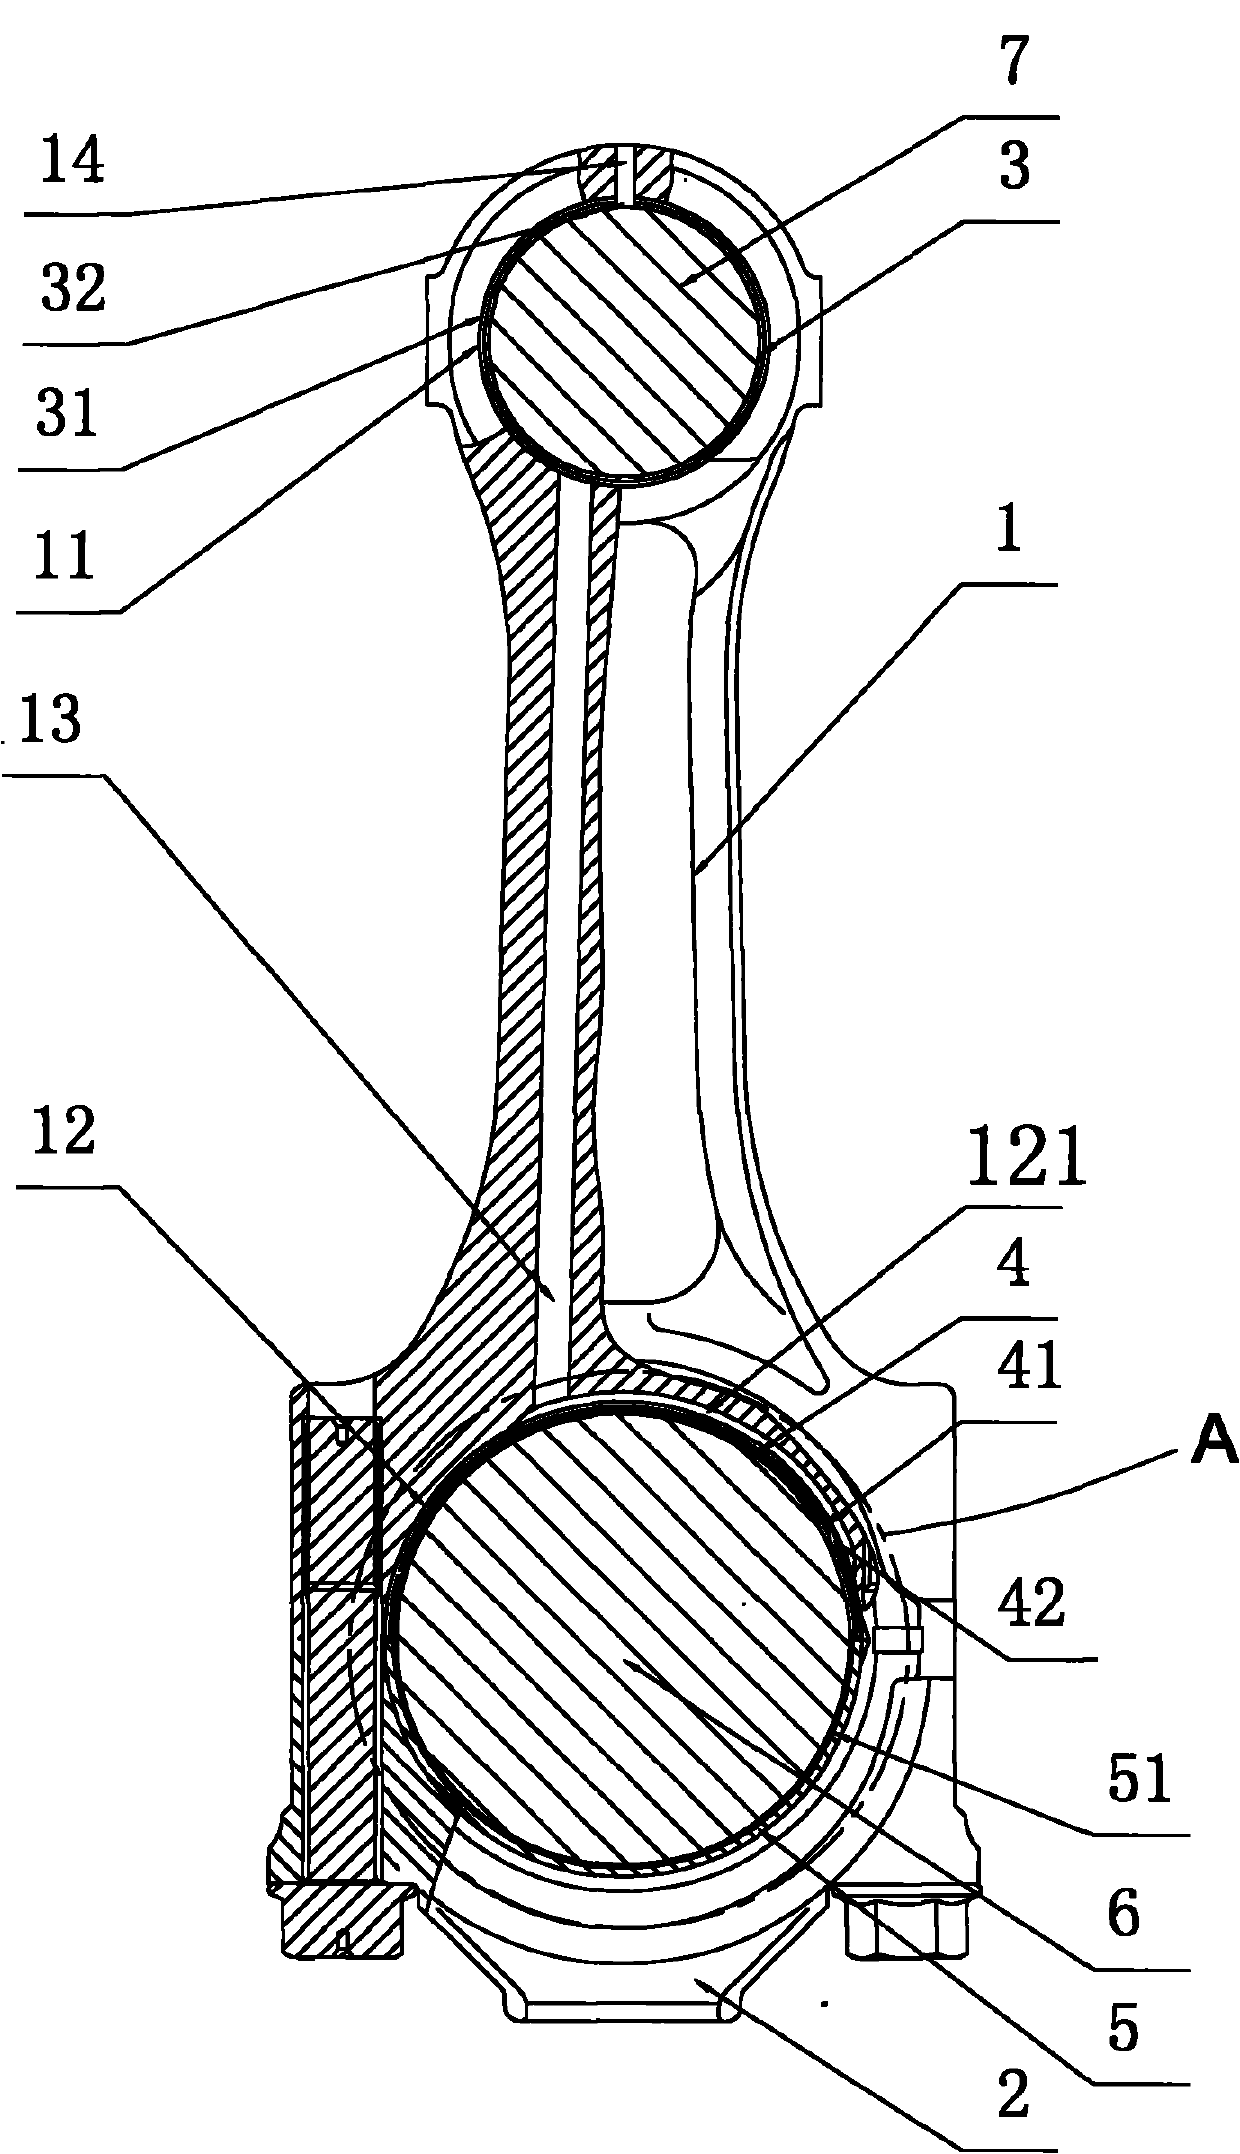 Structural improvement of engine connecting rod